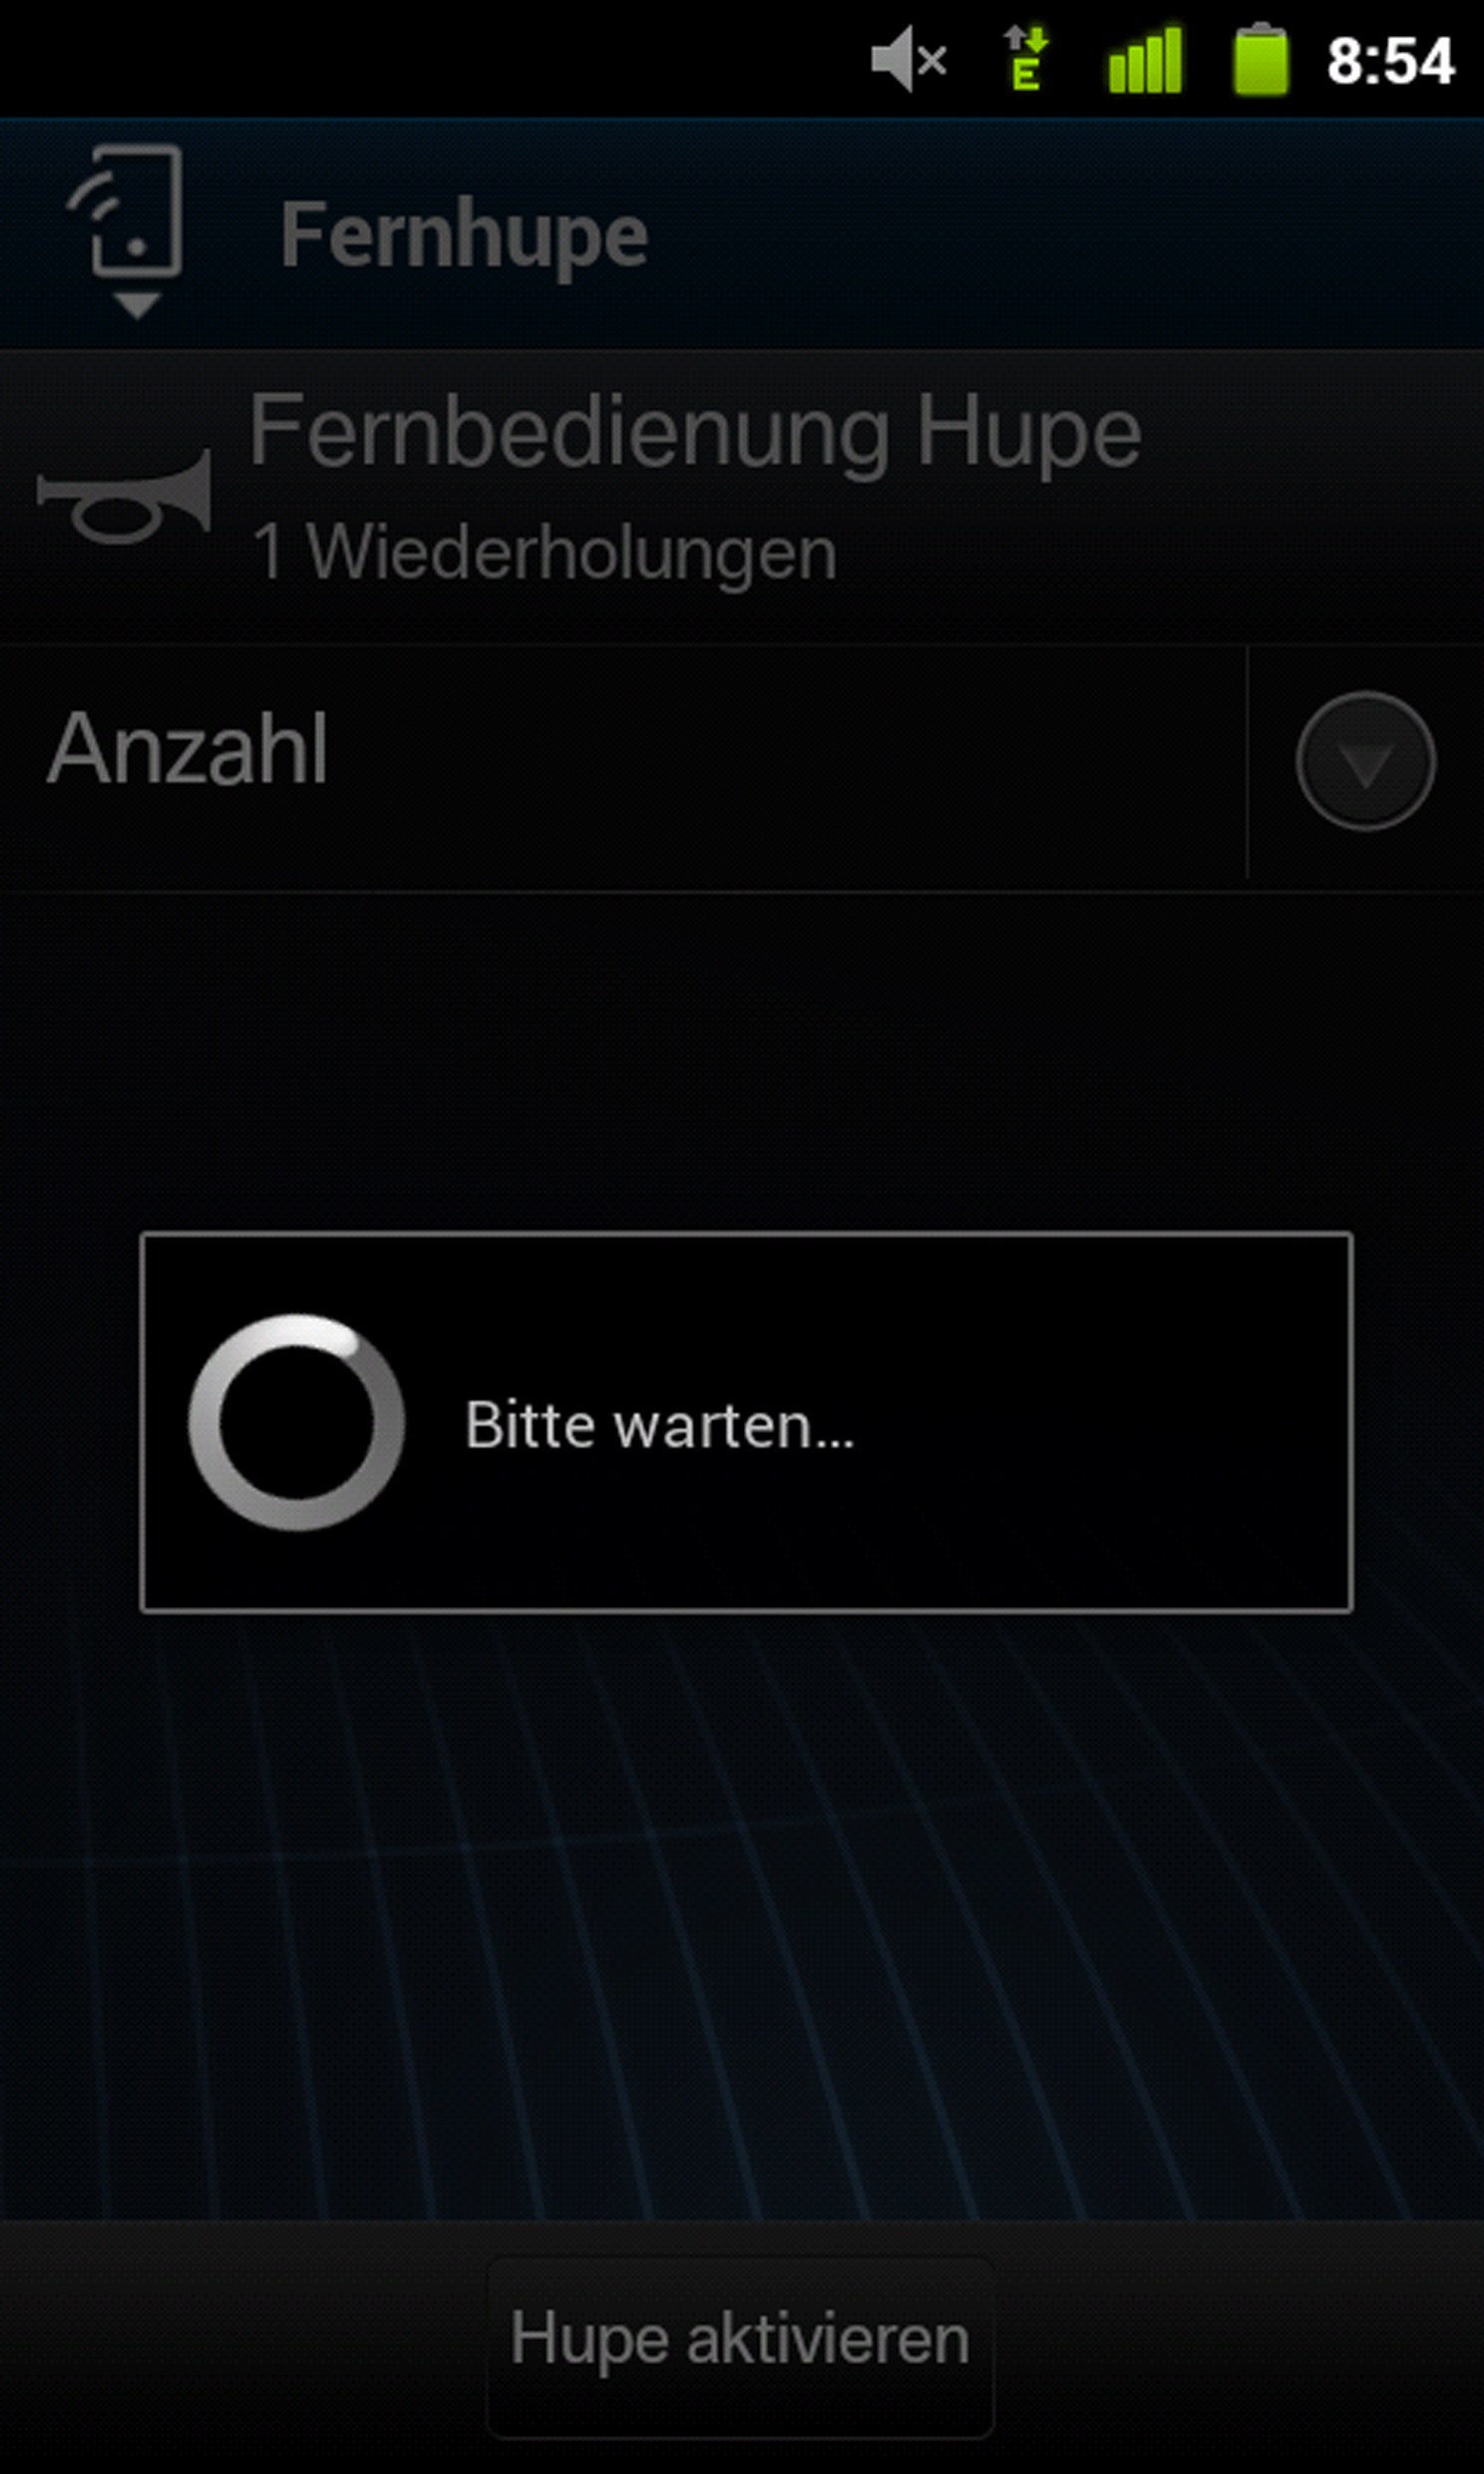 Bmw android app #1